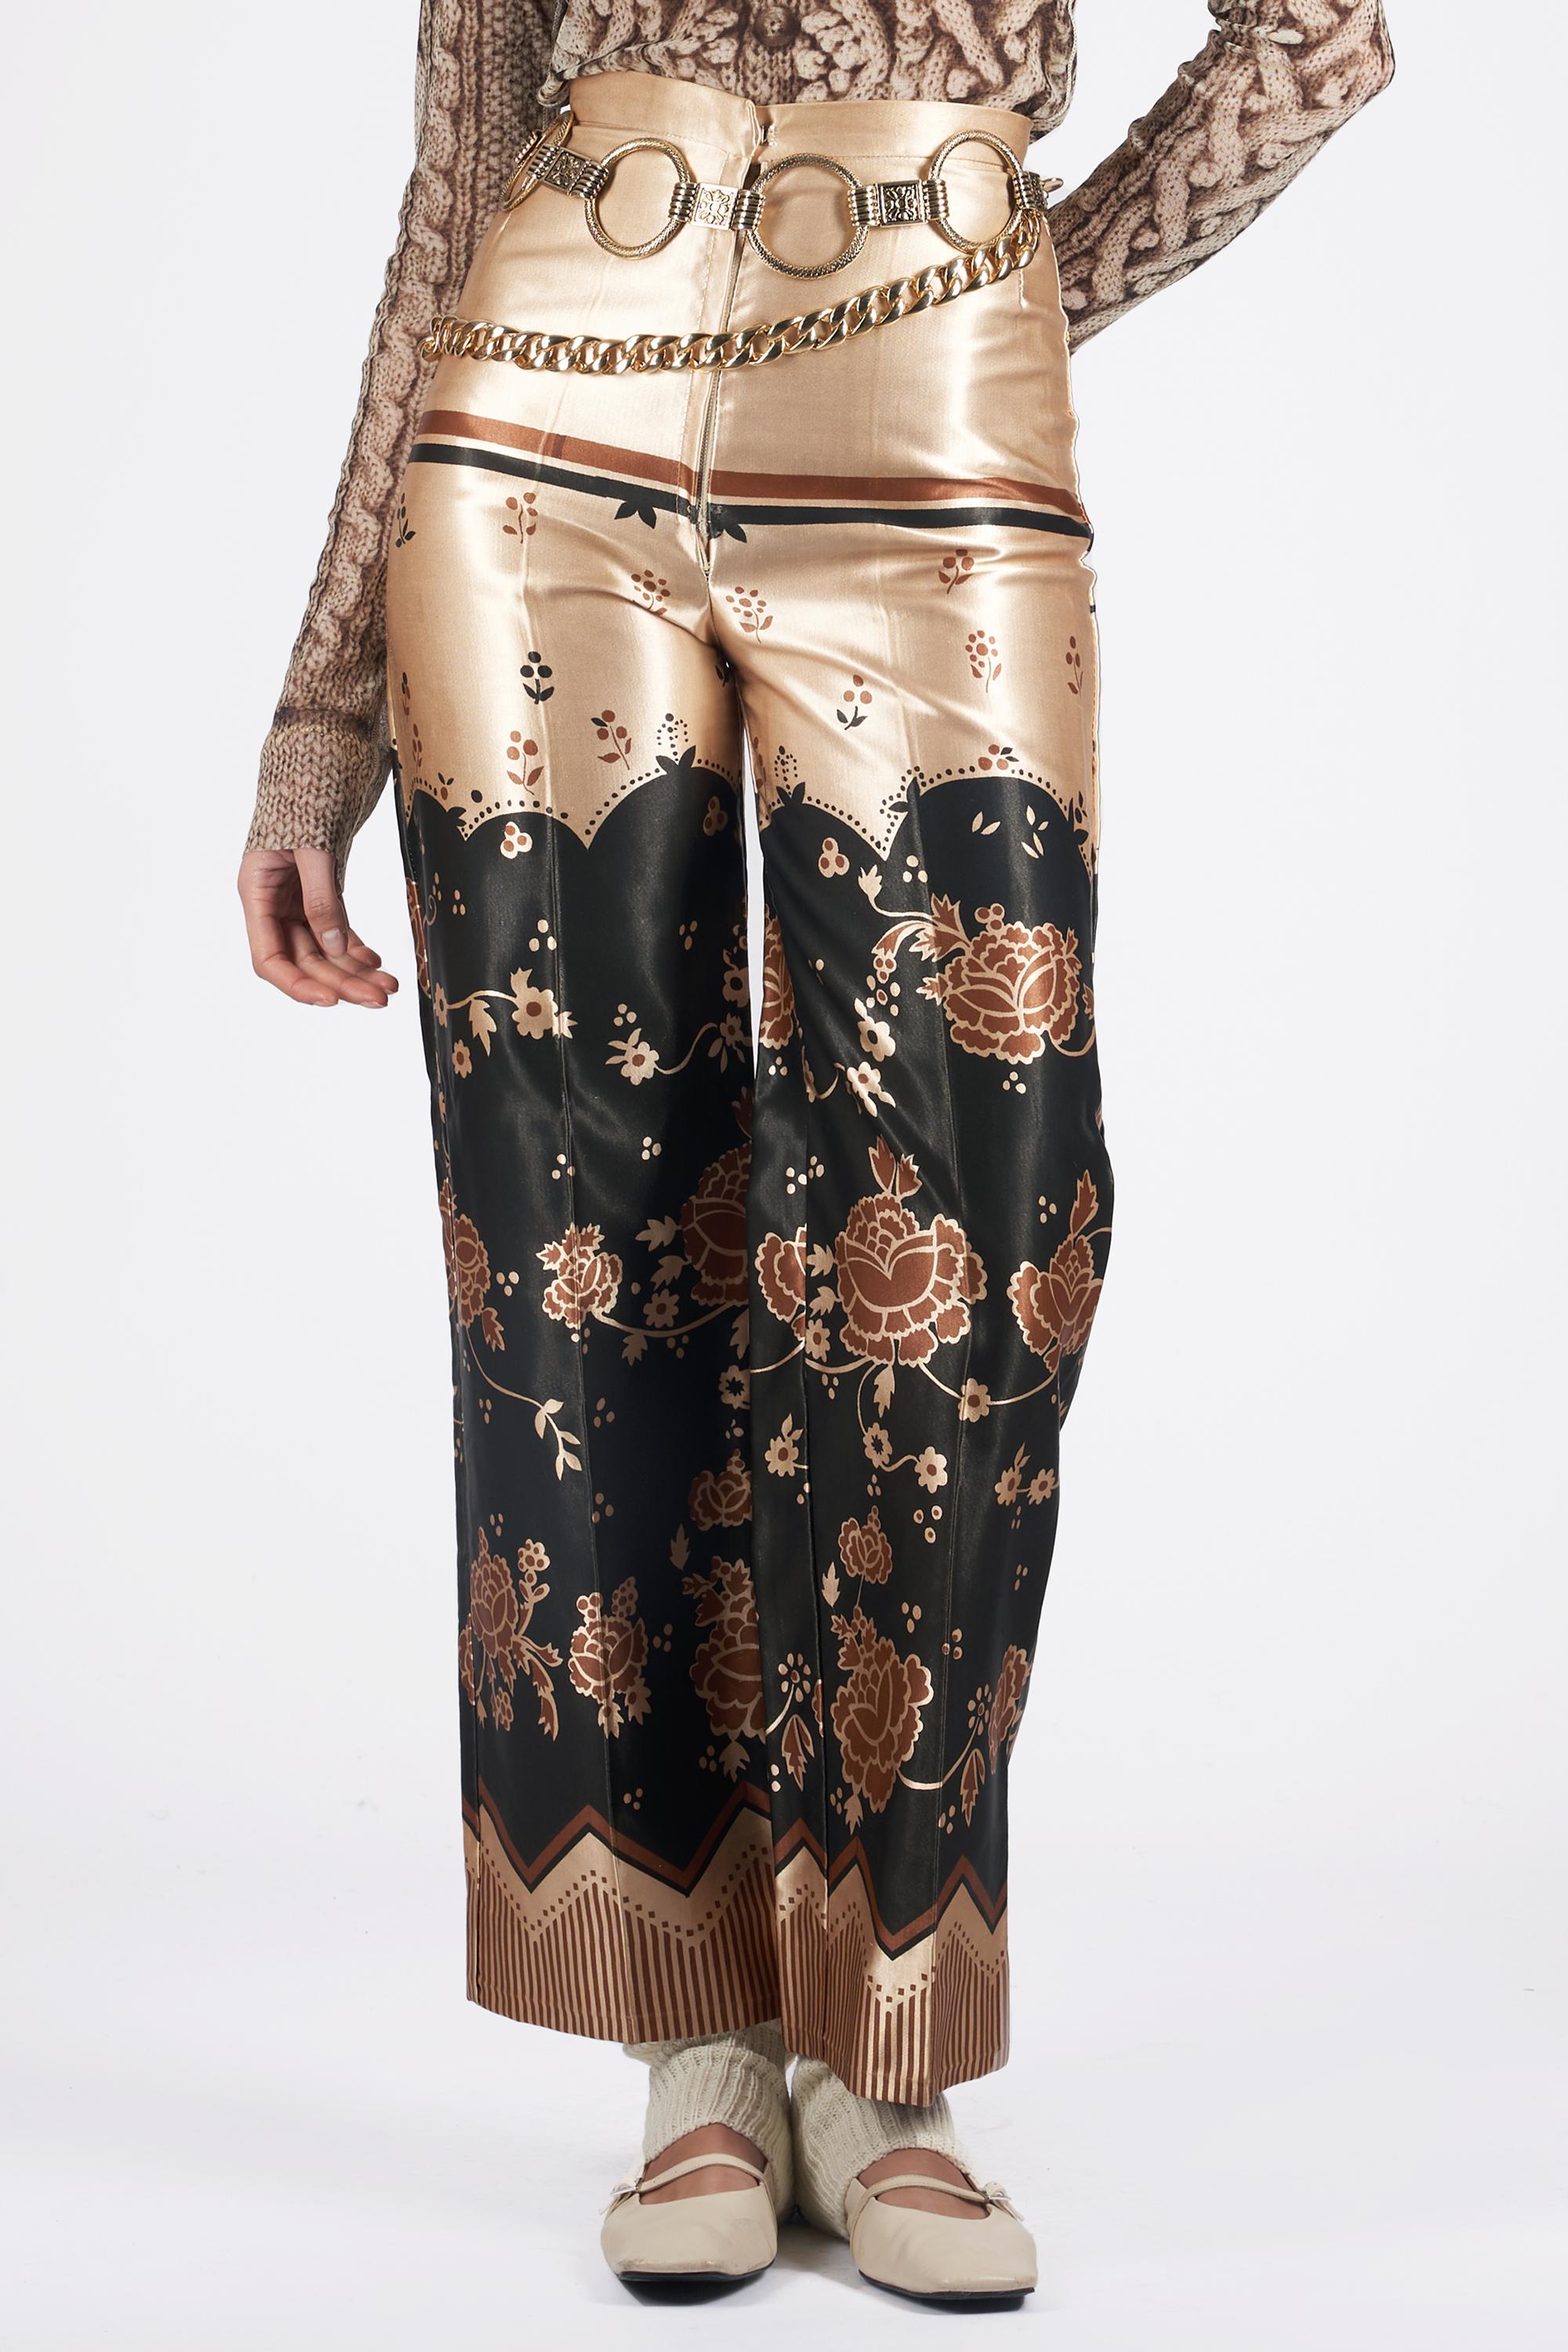 We are excited to present this iconic  Ossie Clark 1969 satin floral print trousers. Features a high waist and wide leg silhouette, beige with black and brown floral print, zip front and concealed hook for closure. In excellent vintage condition. As